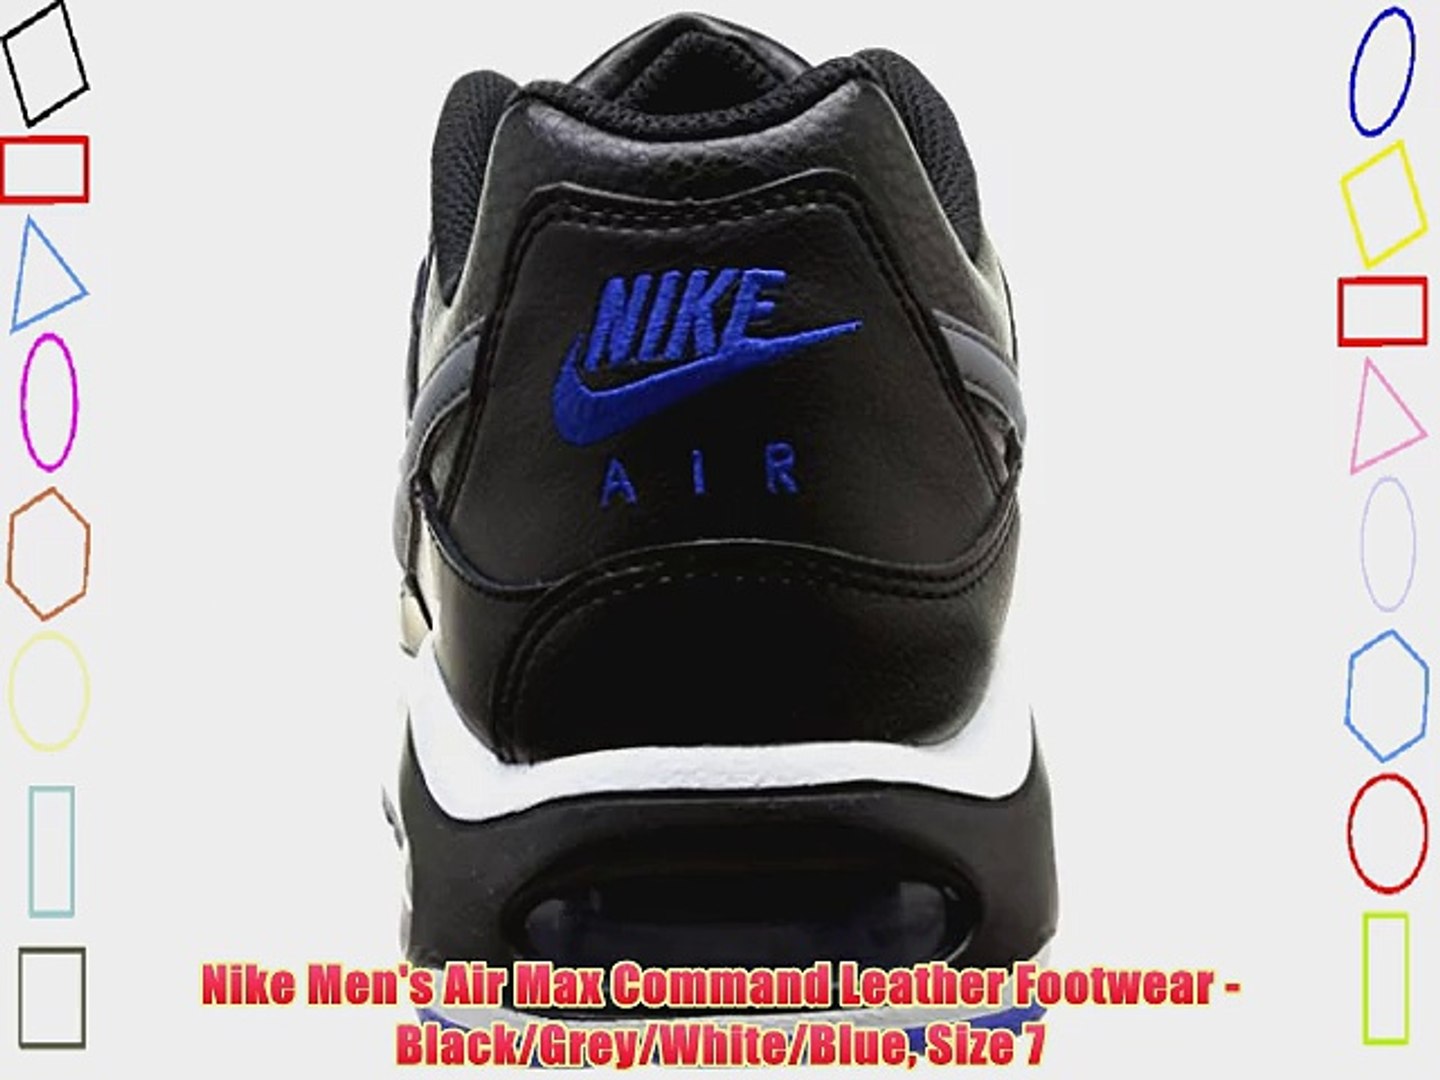 Nike Men's Air Max Command Leather Footwear - Black/Grey/White/Blue Size 7  - video Dailymotion